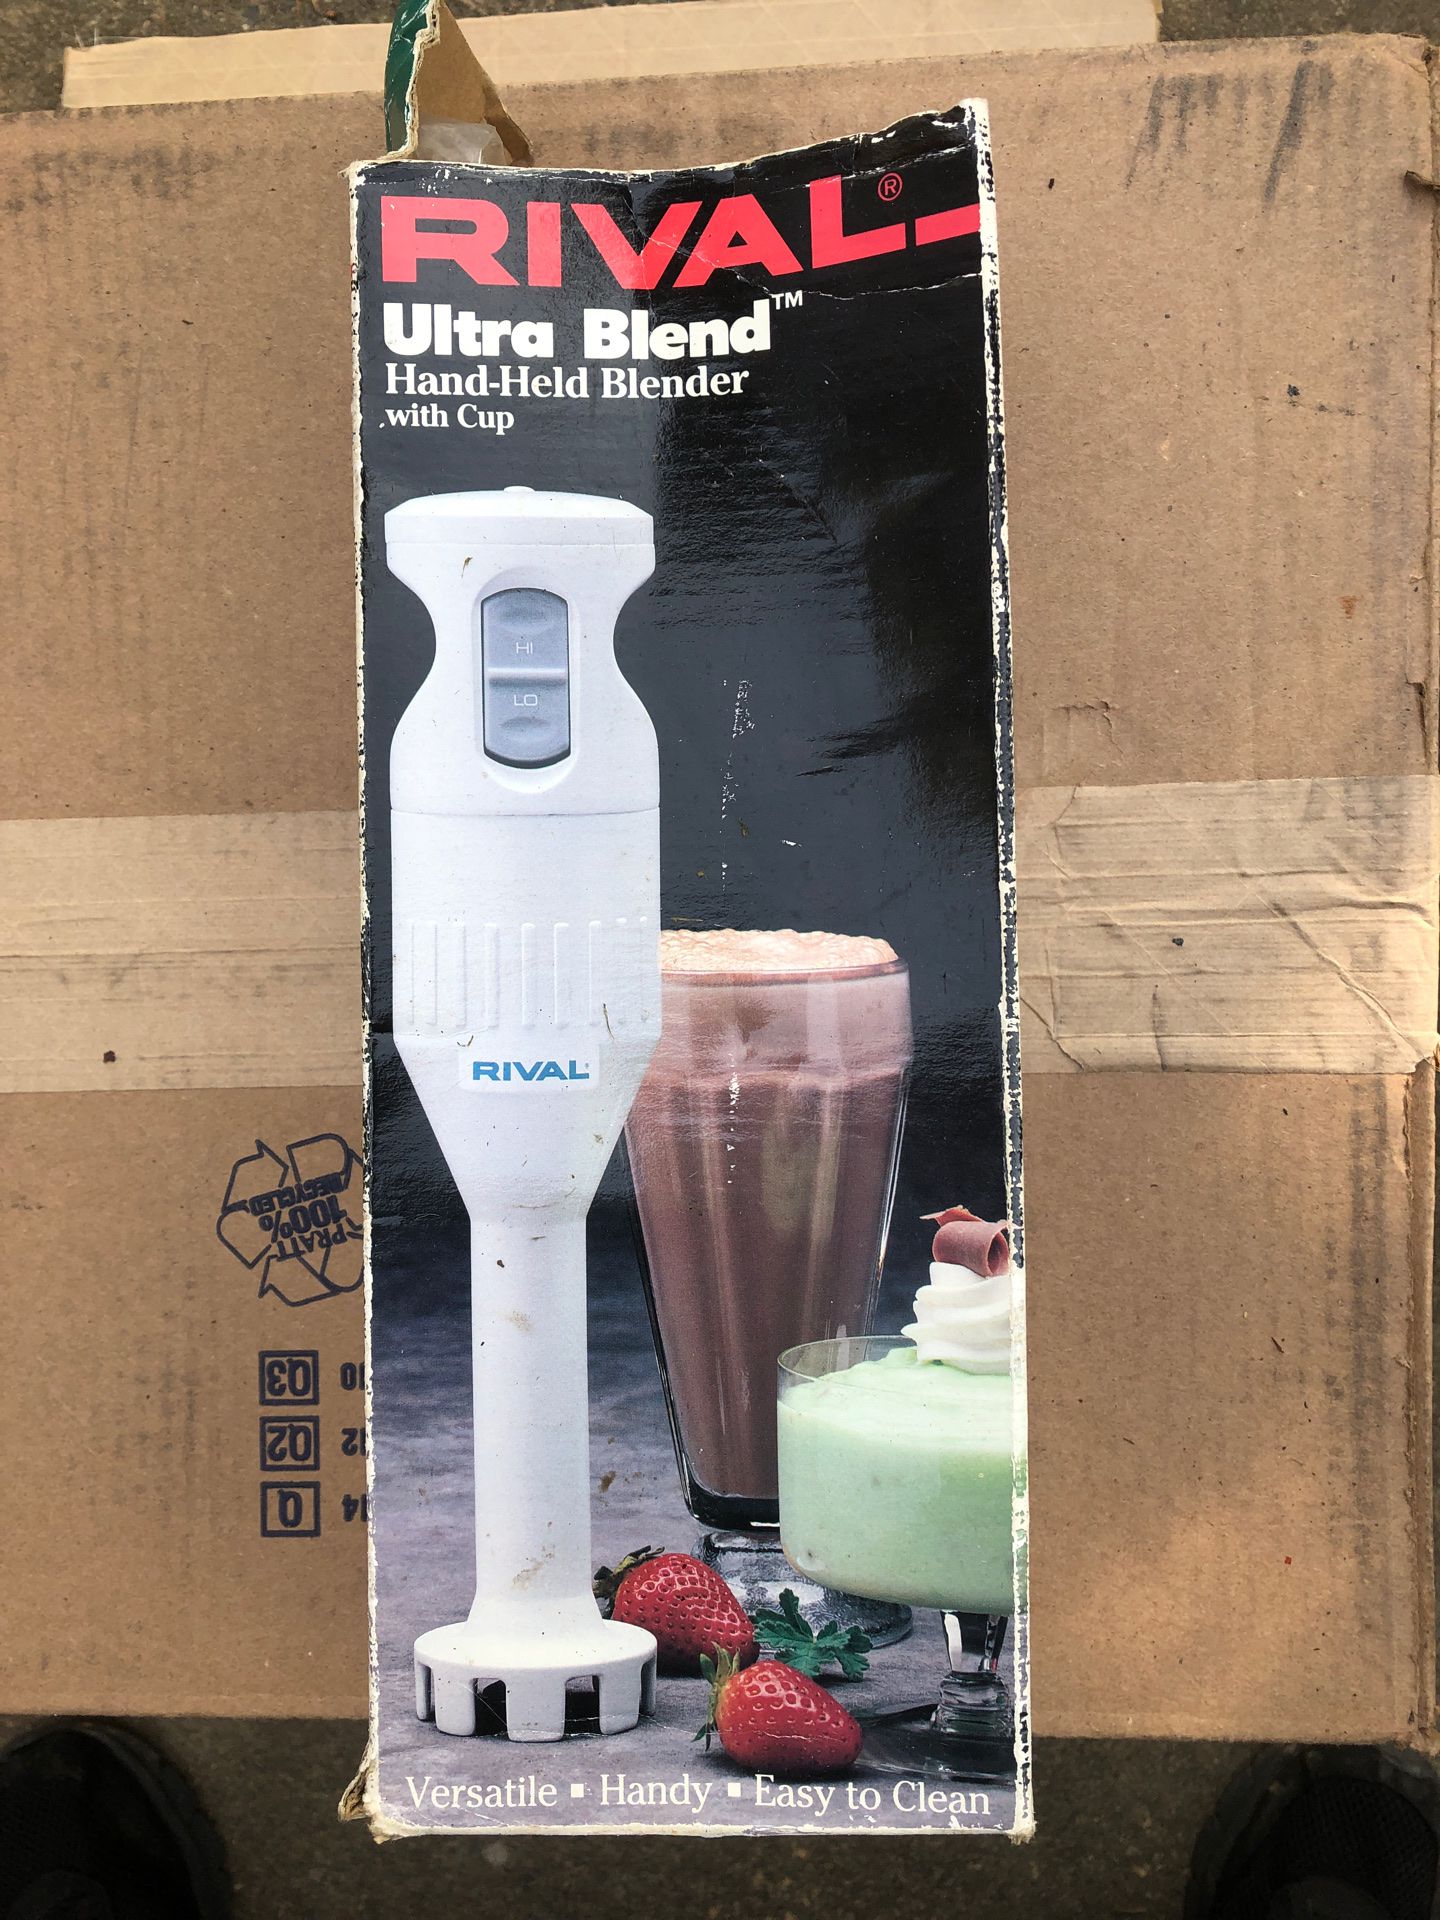 Rival ultra blend hand-held blender with cup